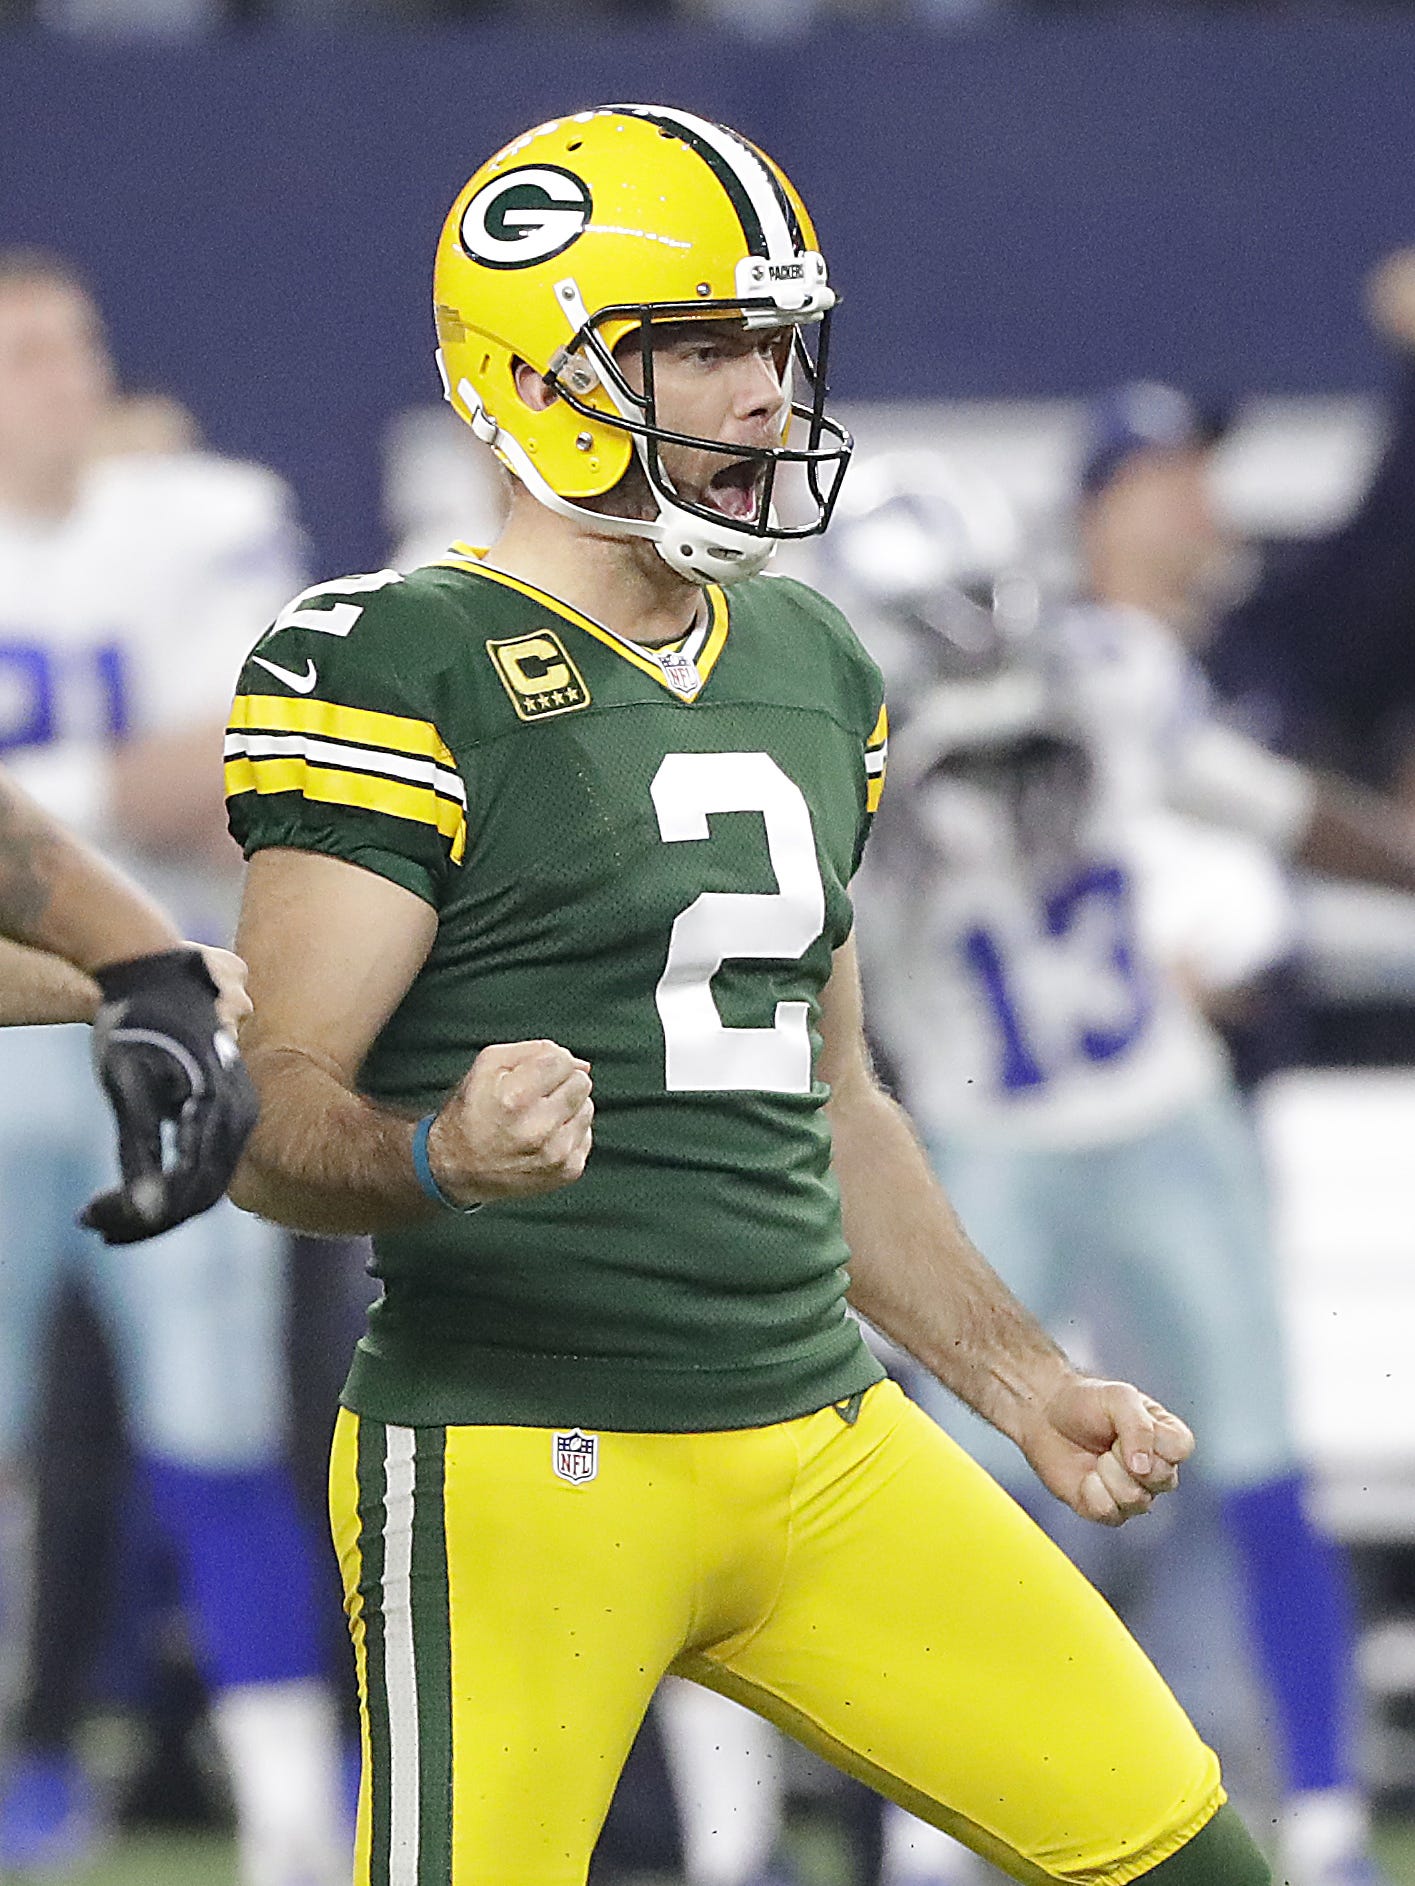 Green Bay Packers kicker Mason Crosby (2) celebrates his long field goal to take the lead late in the fourth quarter against the Dallas Cowboys on Jan. 15, 2017, at AT&T Stadium in Arlington, Texas.